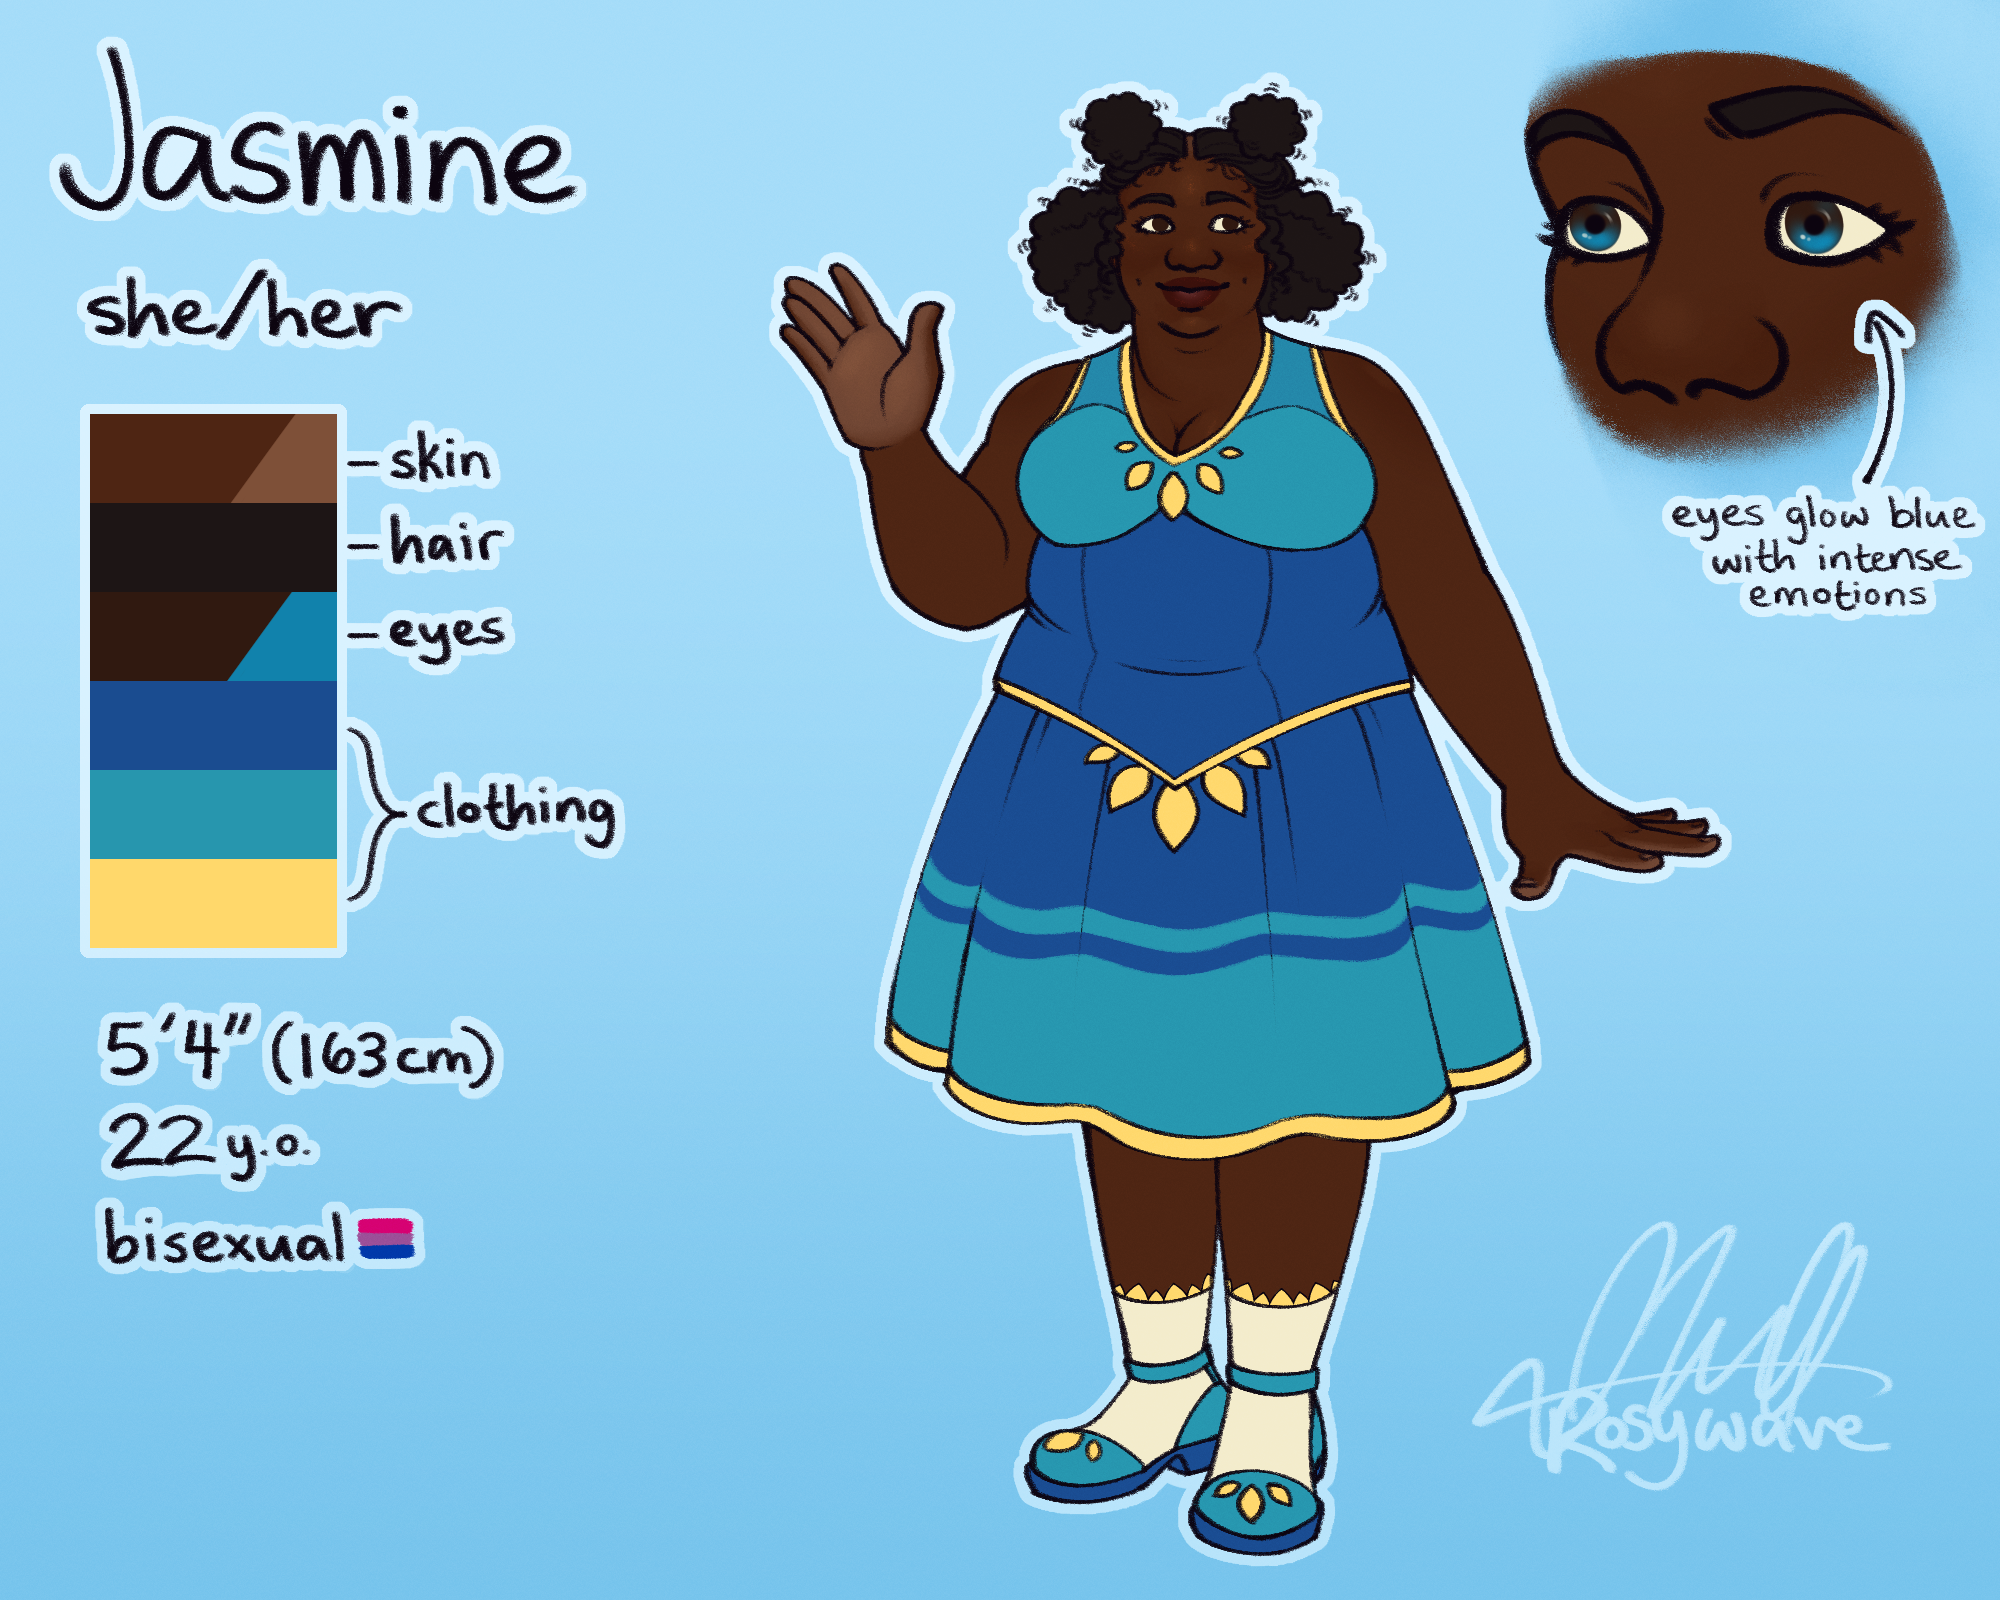 A reference sheet that contains a name, color swatches, basic info, one (1) fullbody ref, and one (1) extra detail ref